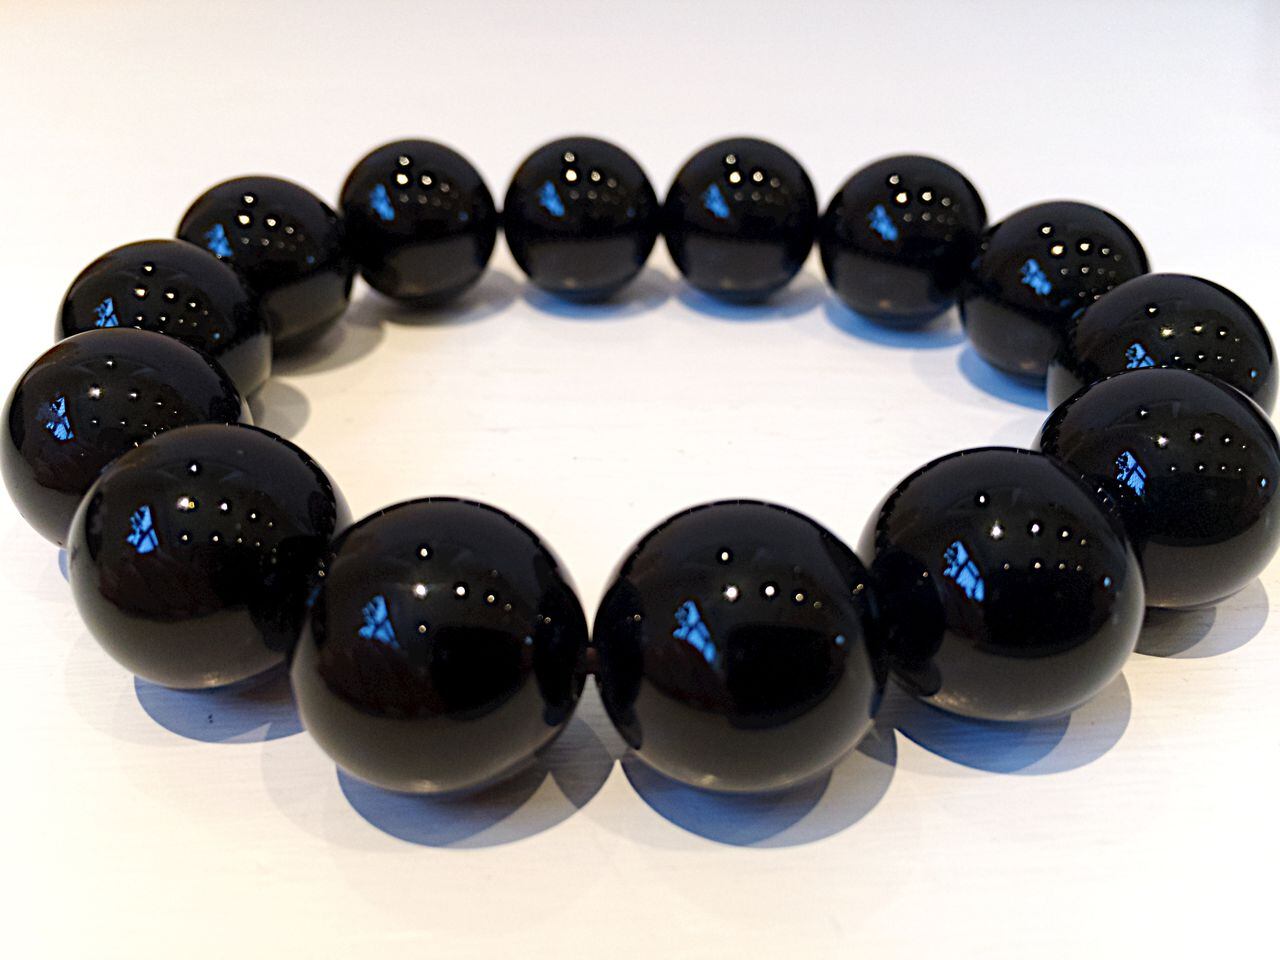 A large beads bracelet of obsidian crystal. Believed to repel negativity